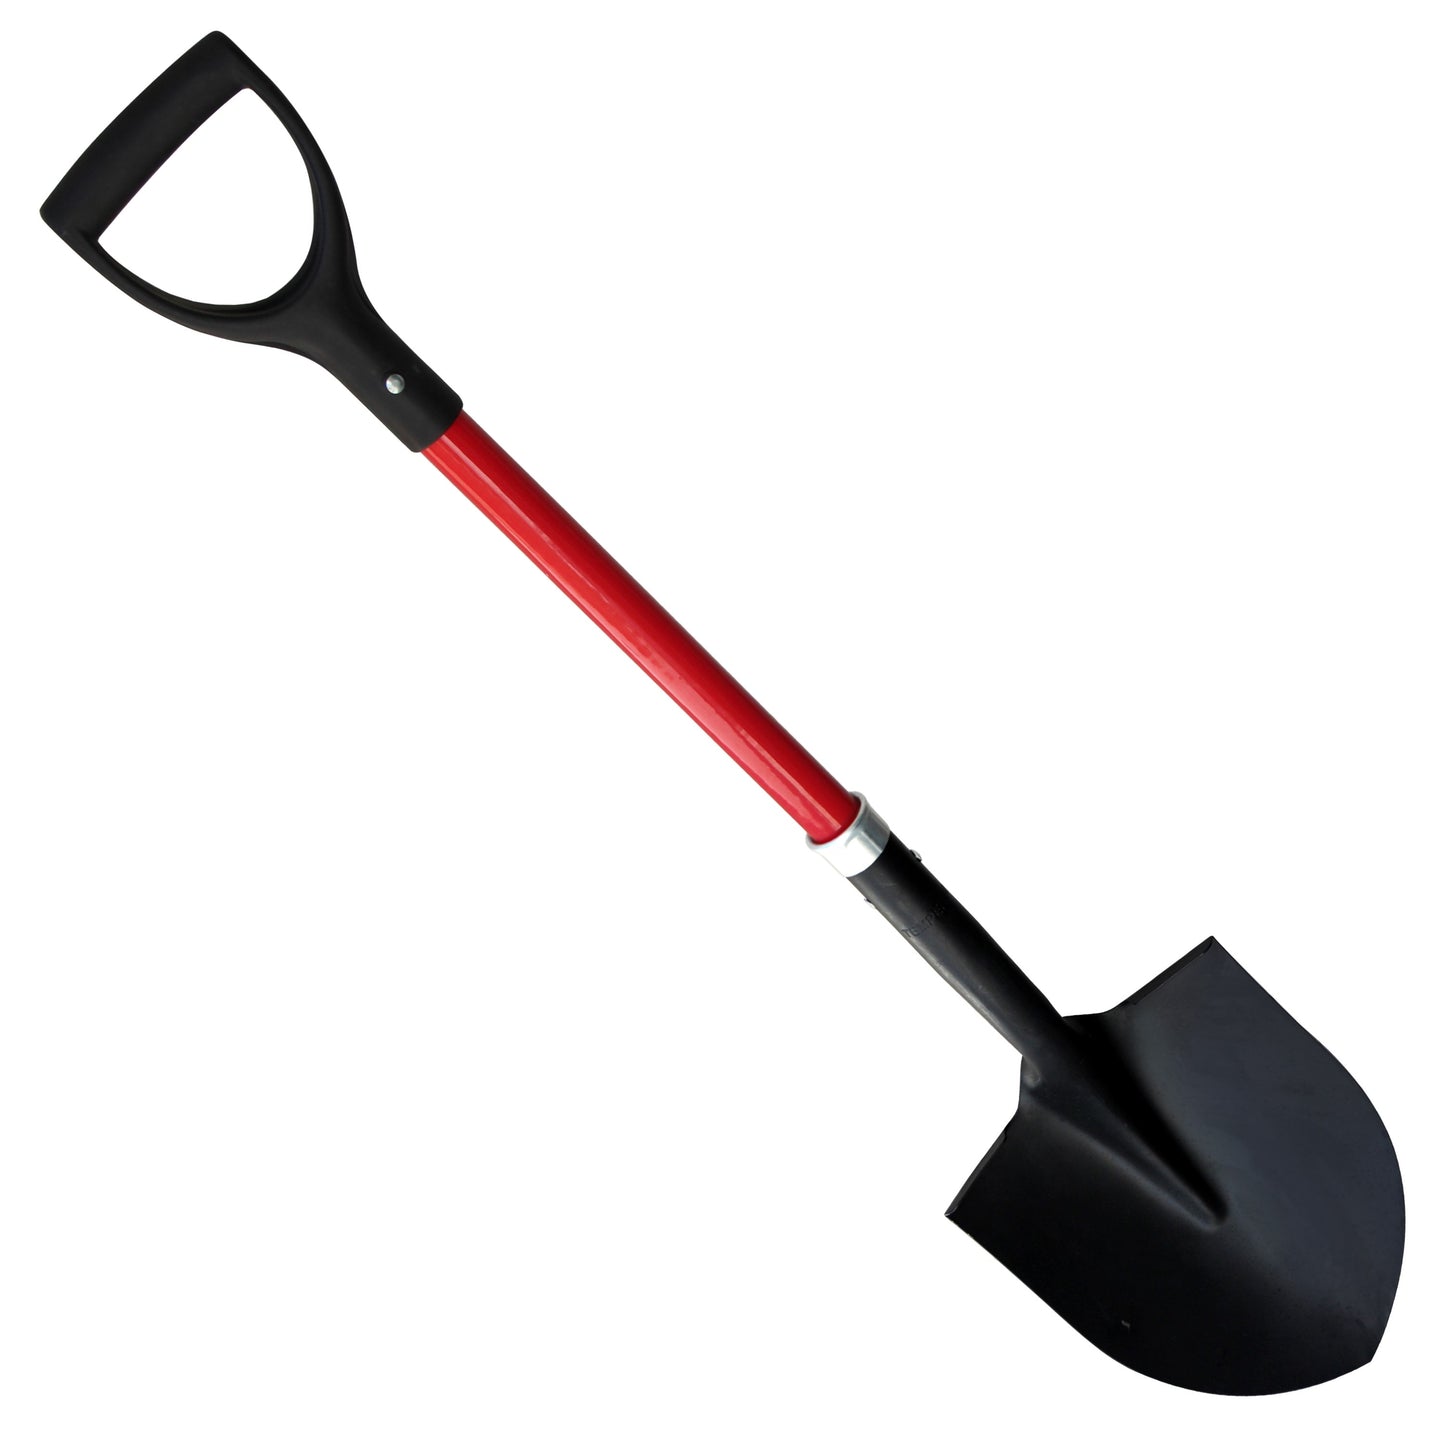 TABOR TOOLS J201 Digging Shovel With Rounded Blade and Comfortable D-Grip 31" Fiberglass Handle